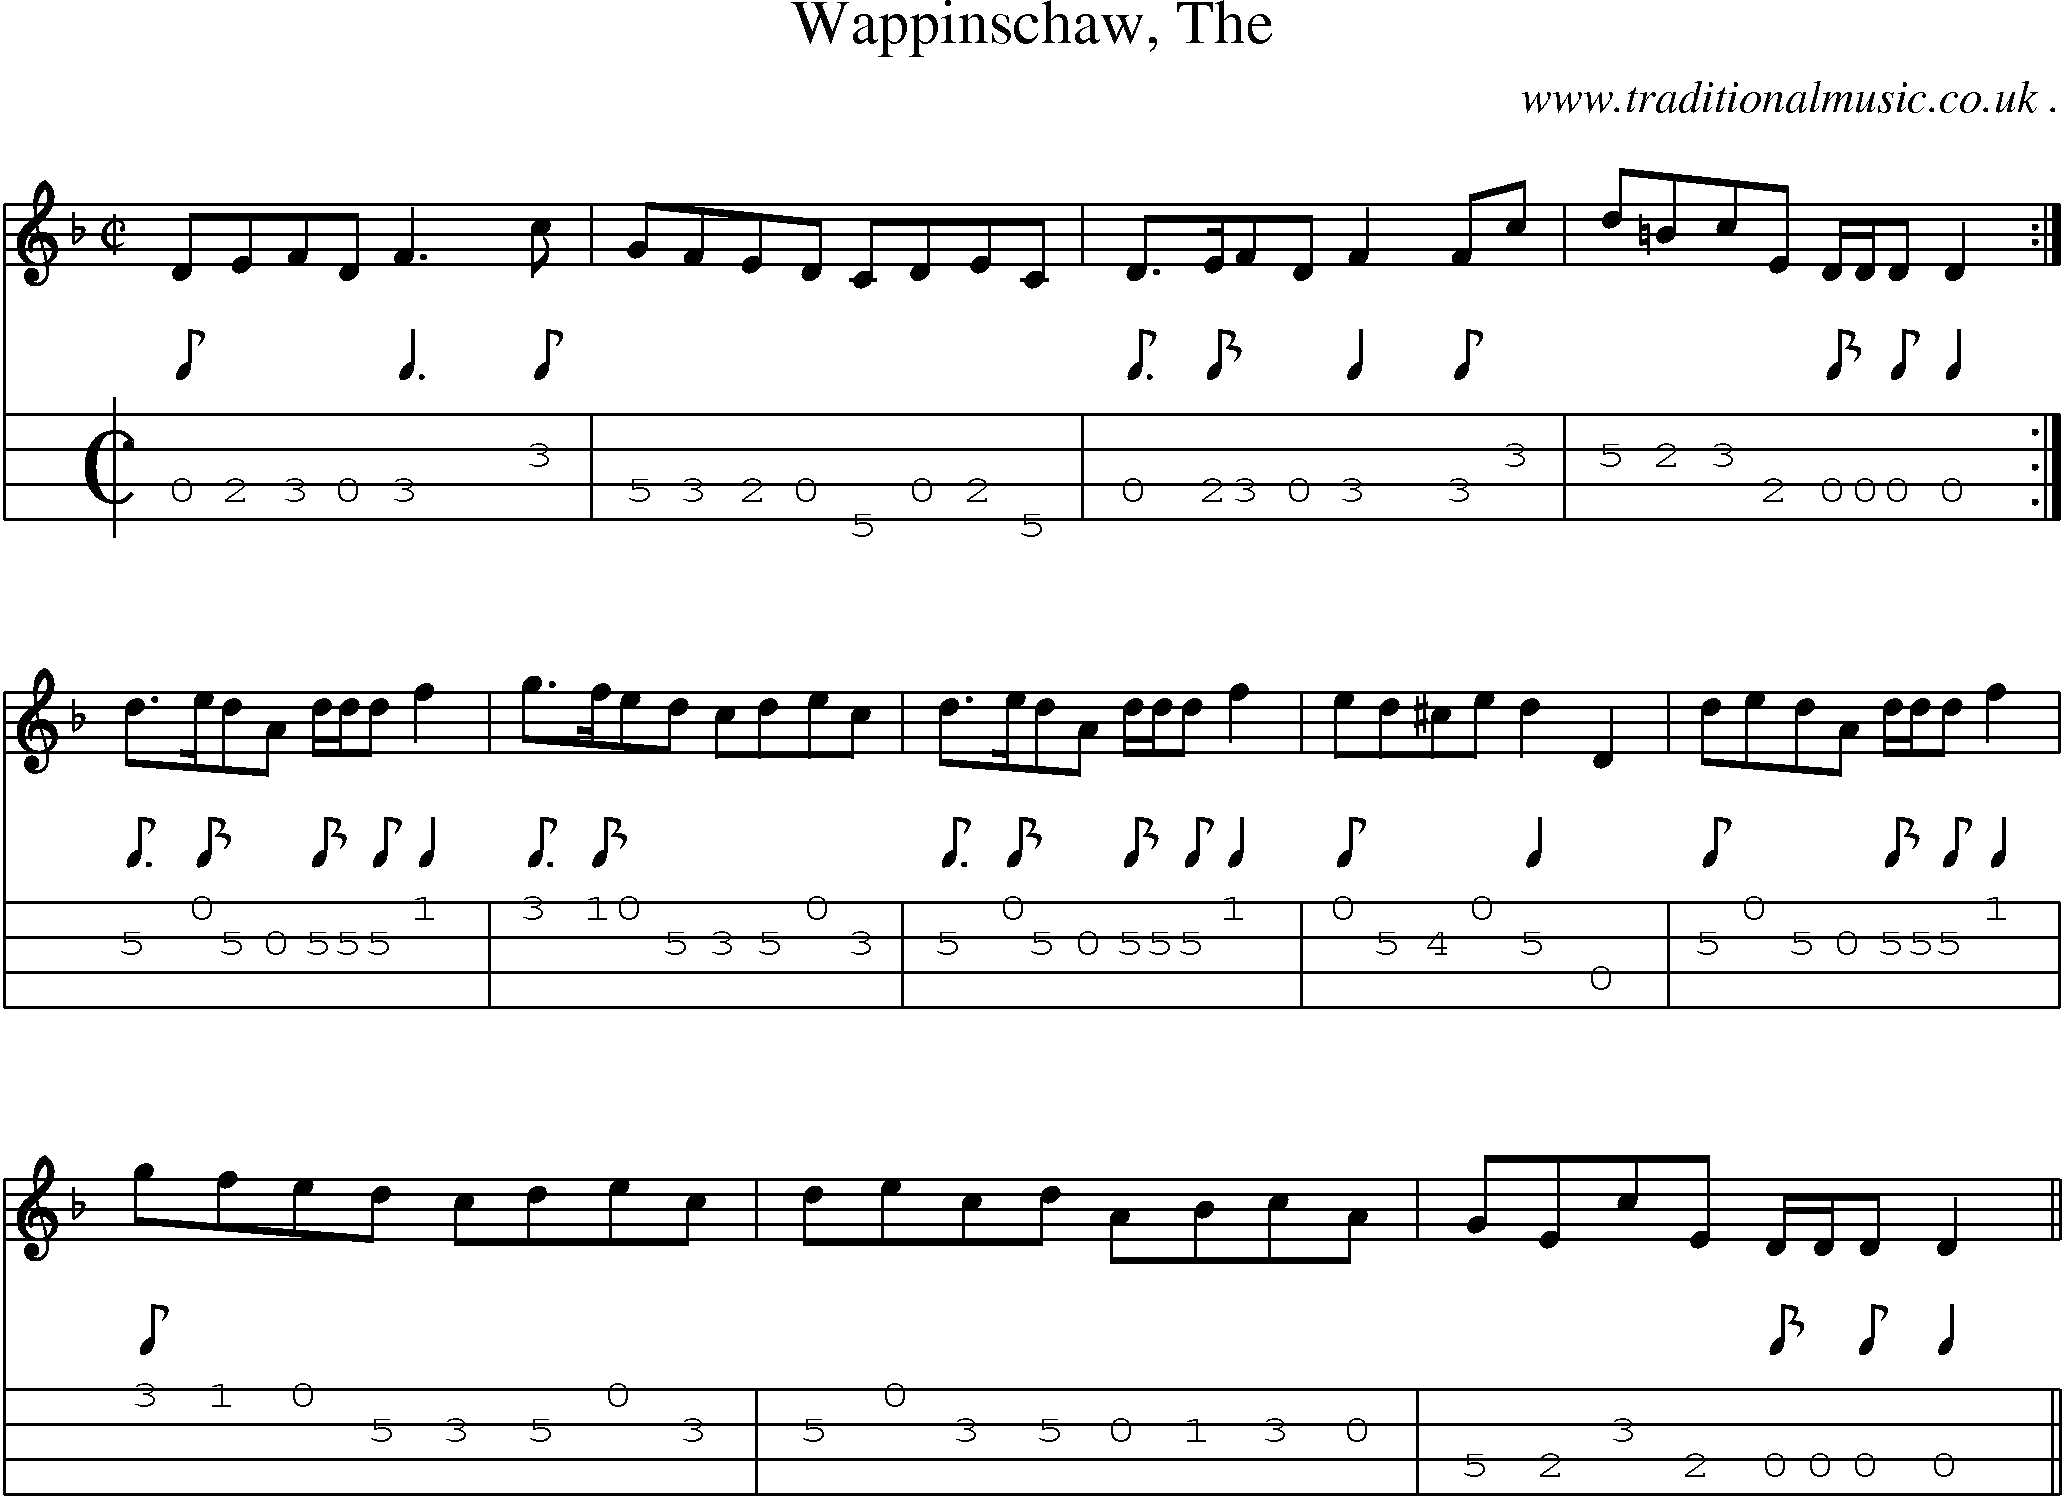 Sheet-music  score, Chords and Mandolin Tabs for Wappinschaw The